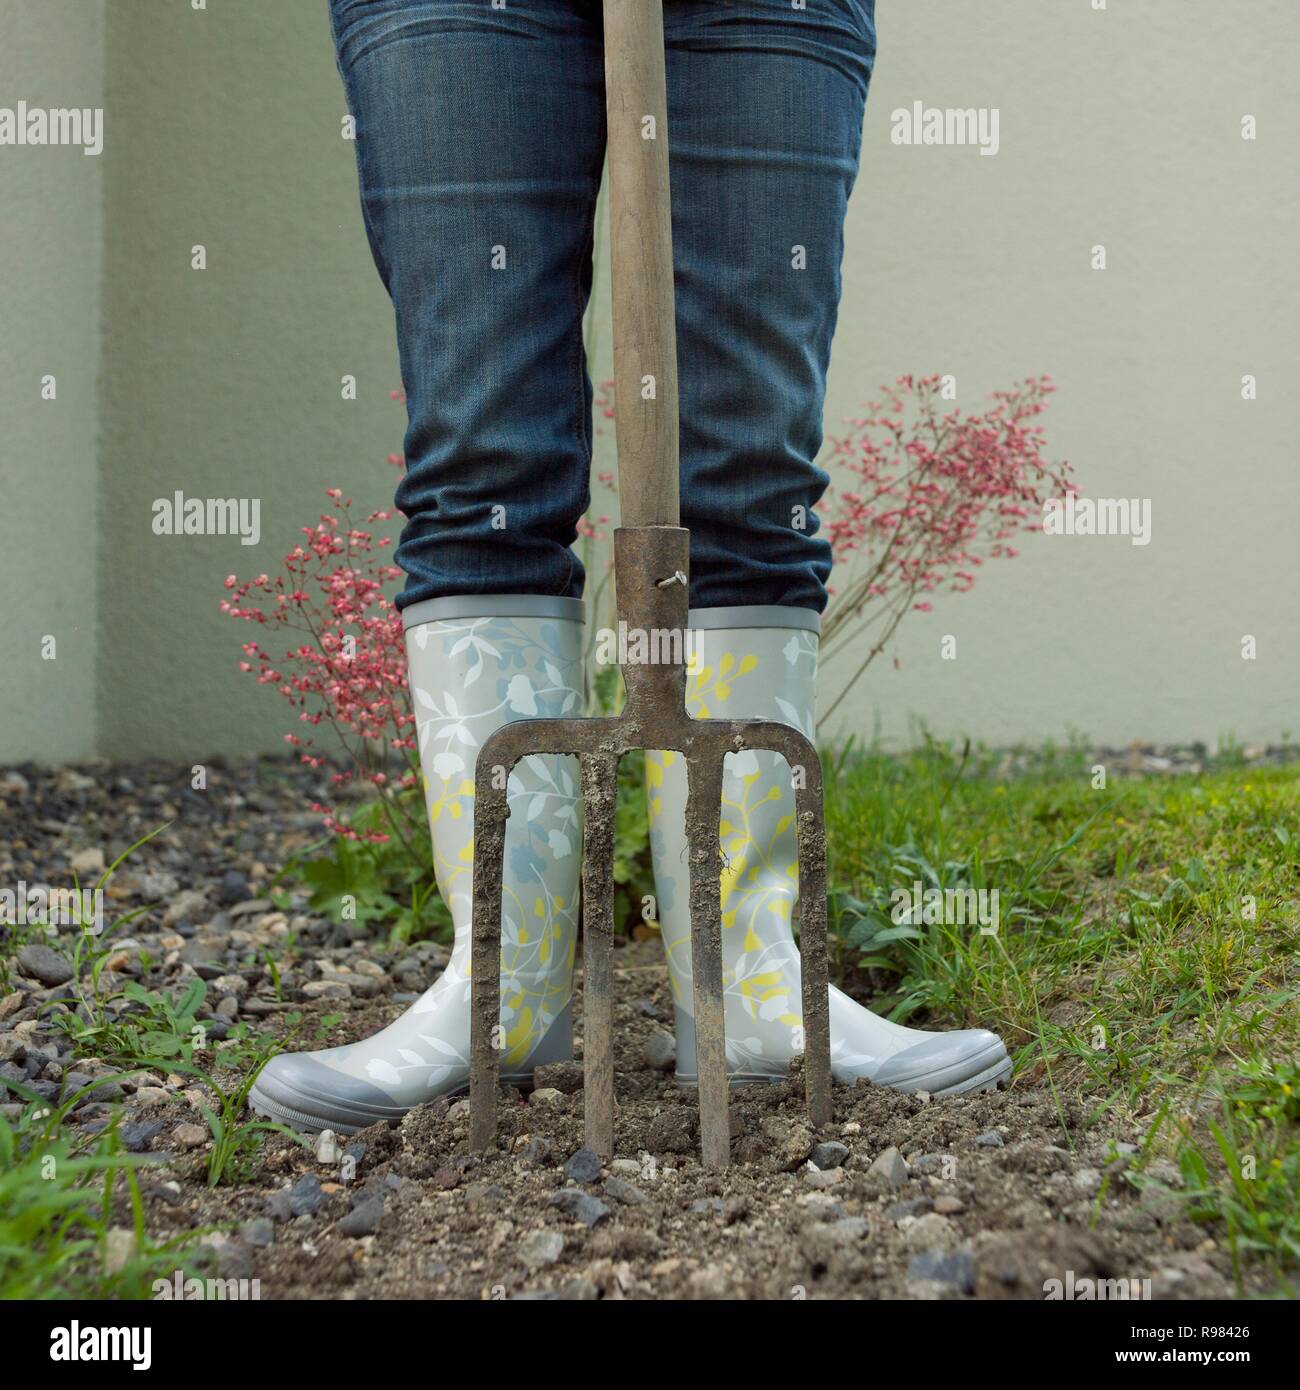 Woman gardener digging in soil with garden fork wearing in rubber boots Stock Photo